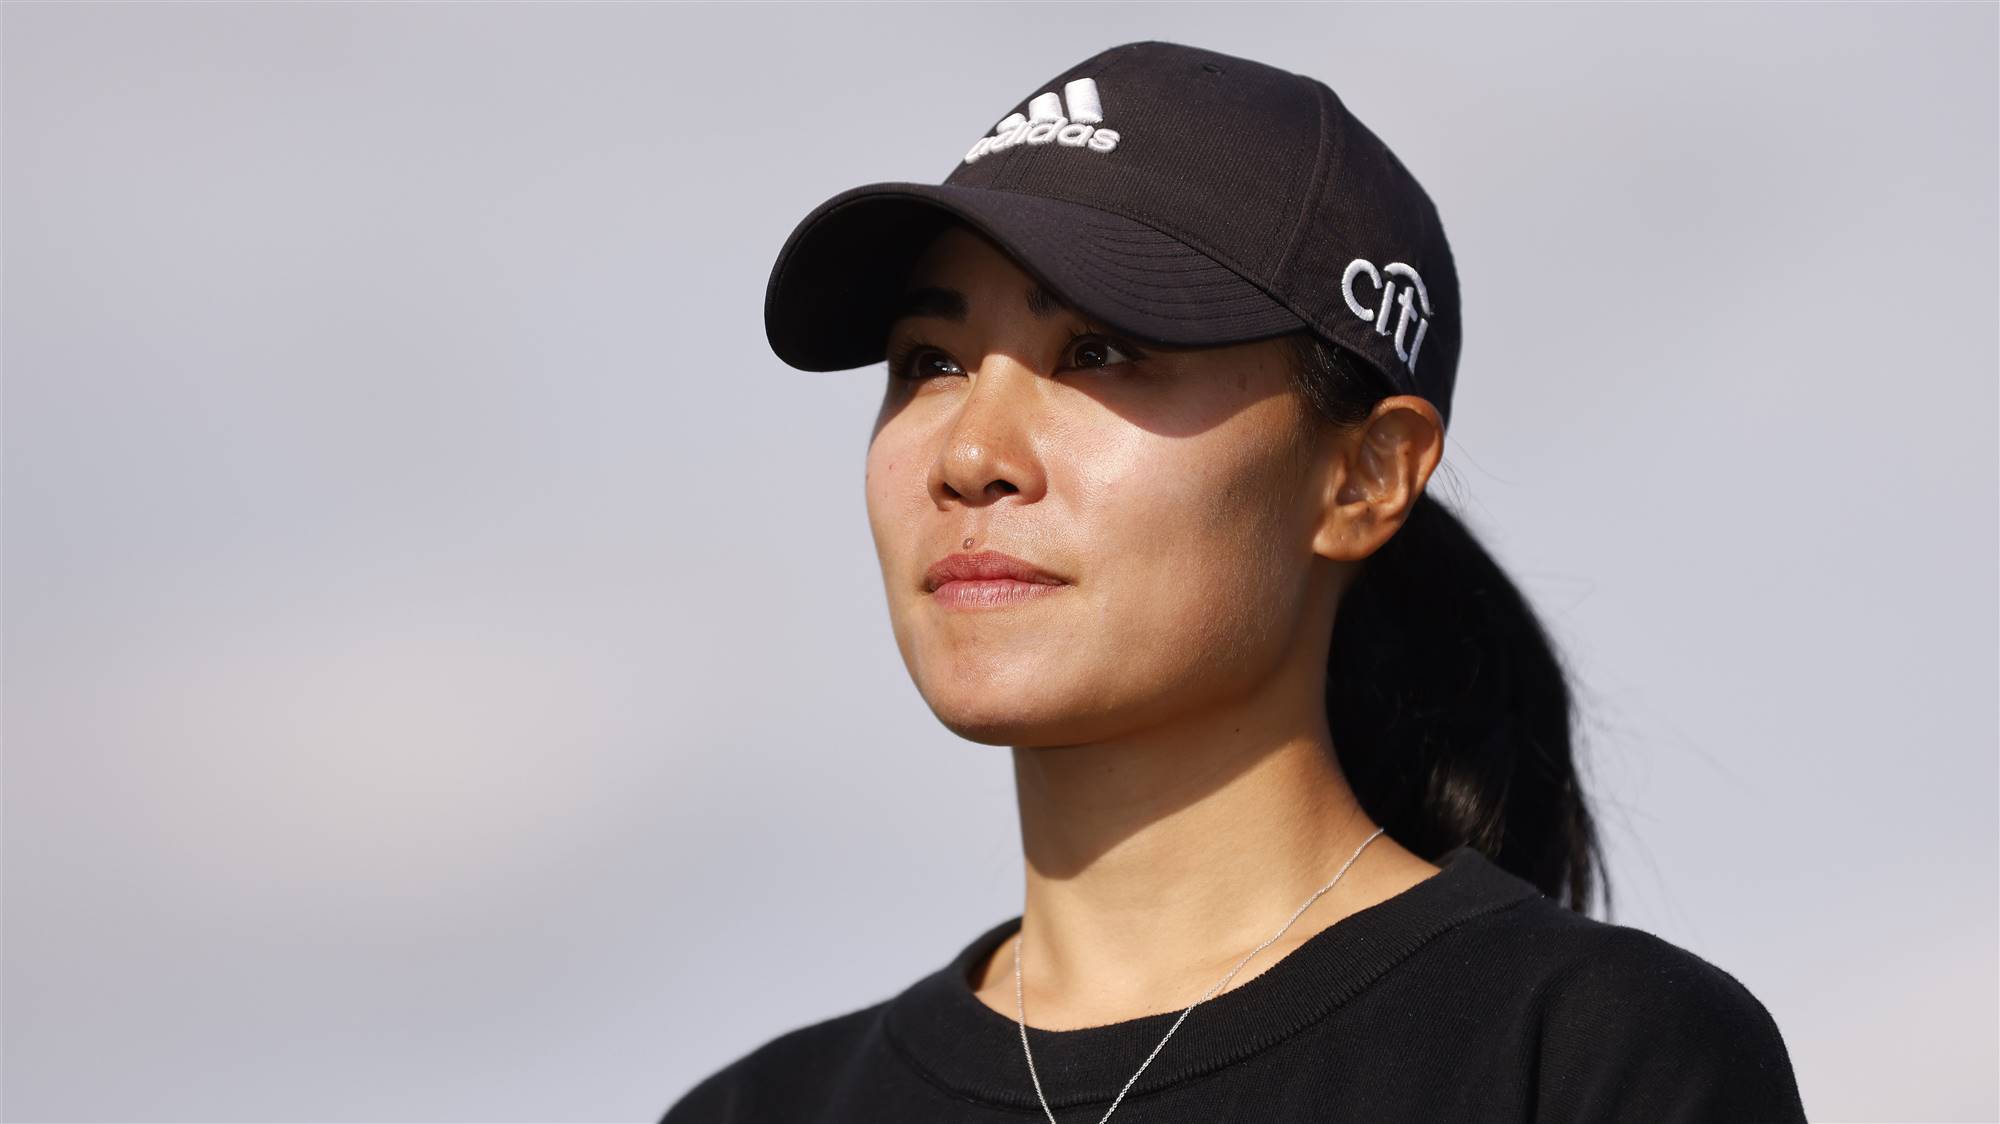 Danielle Kang managed to steal some of the spotlight from the Korda sisters on Thursday a...